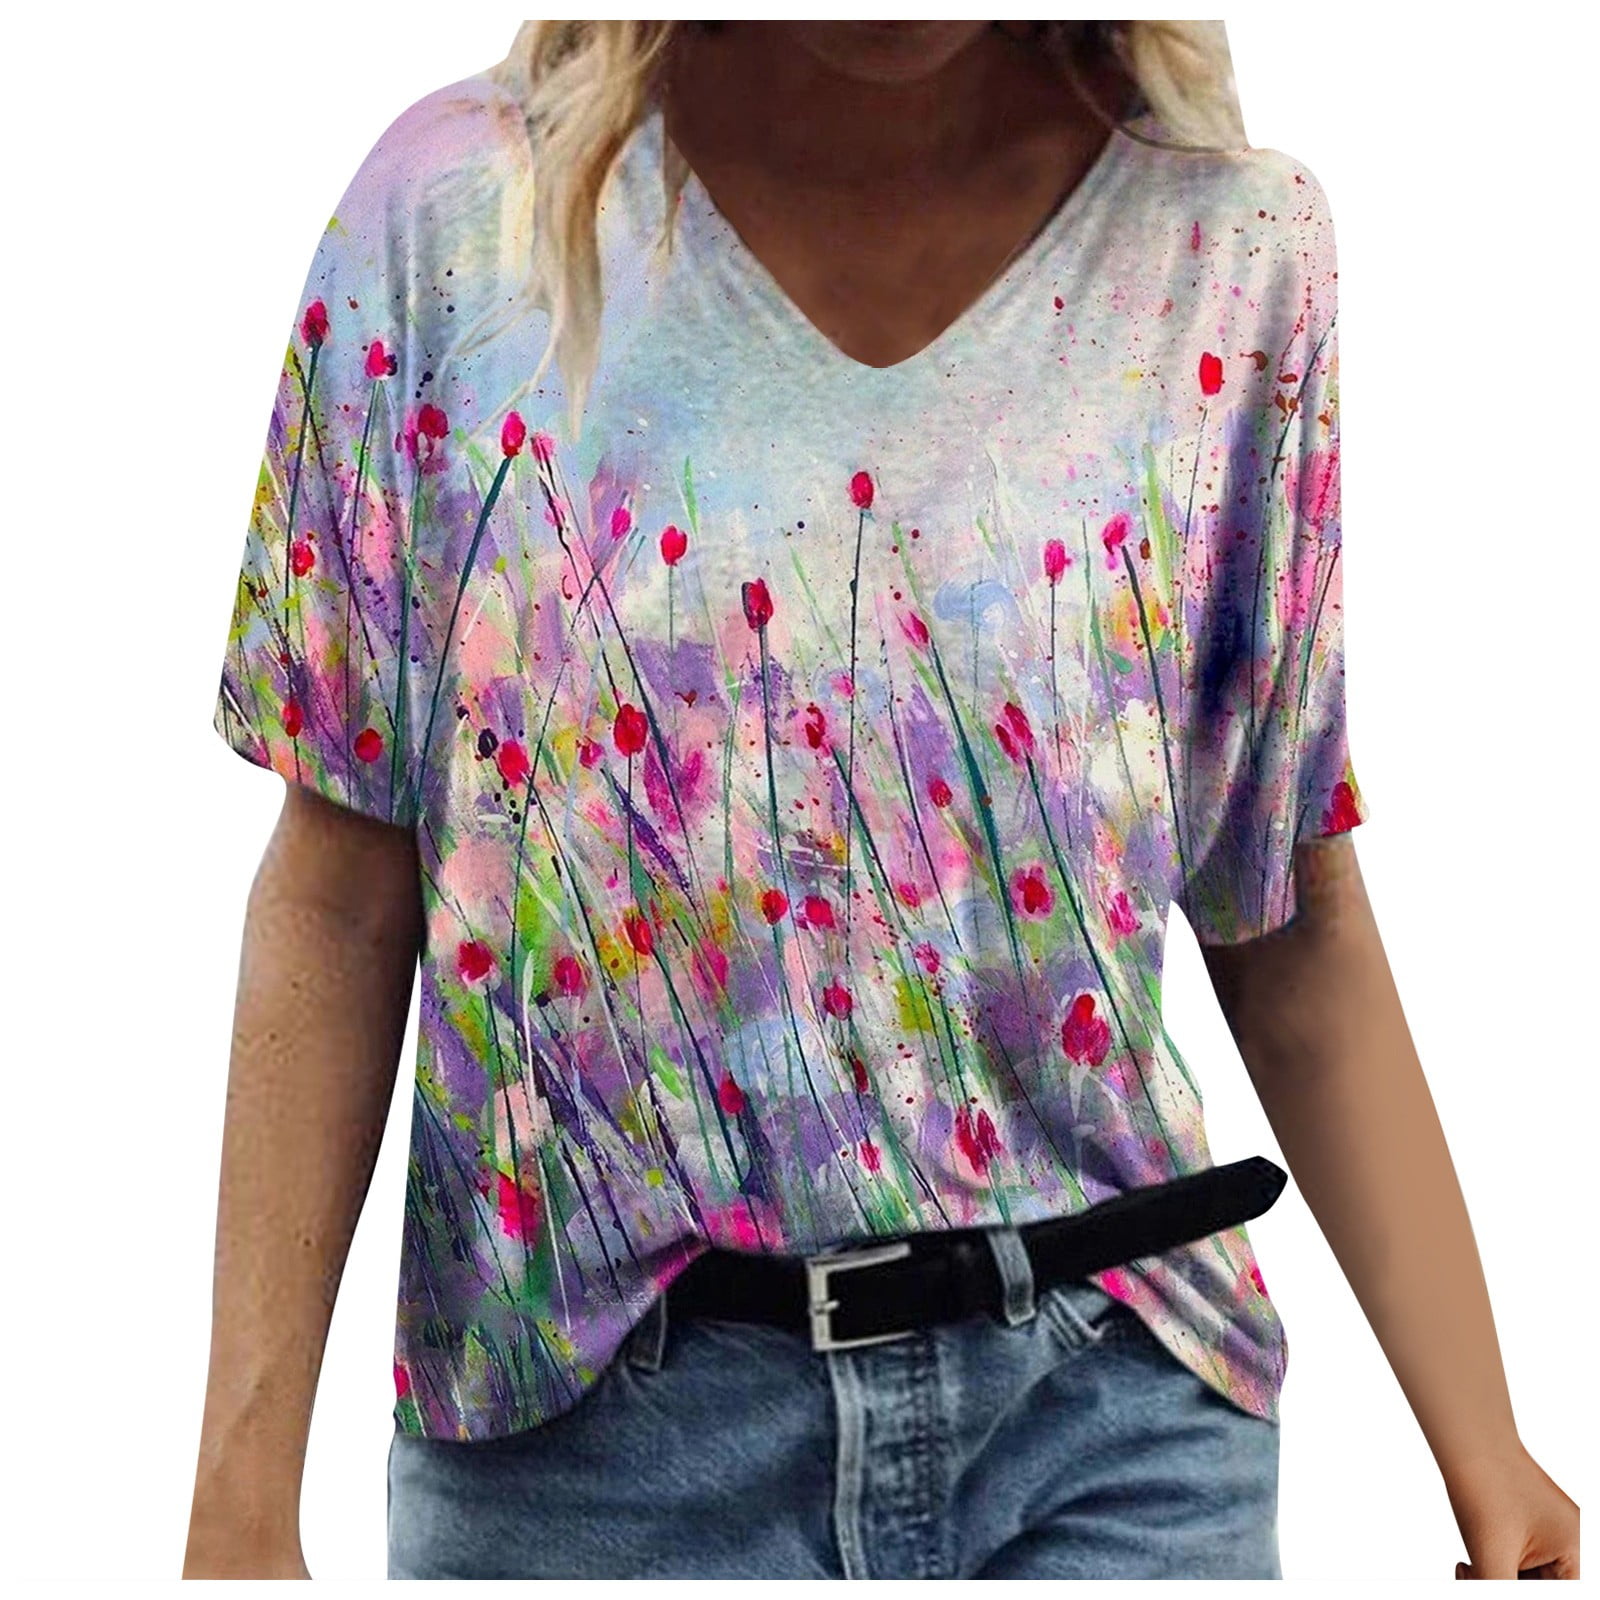 AOOCHASLIY Womens Tops Clearance Summer O-Neck Graphic Floral Print T ...